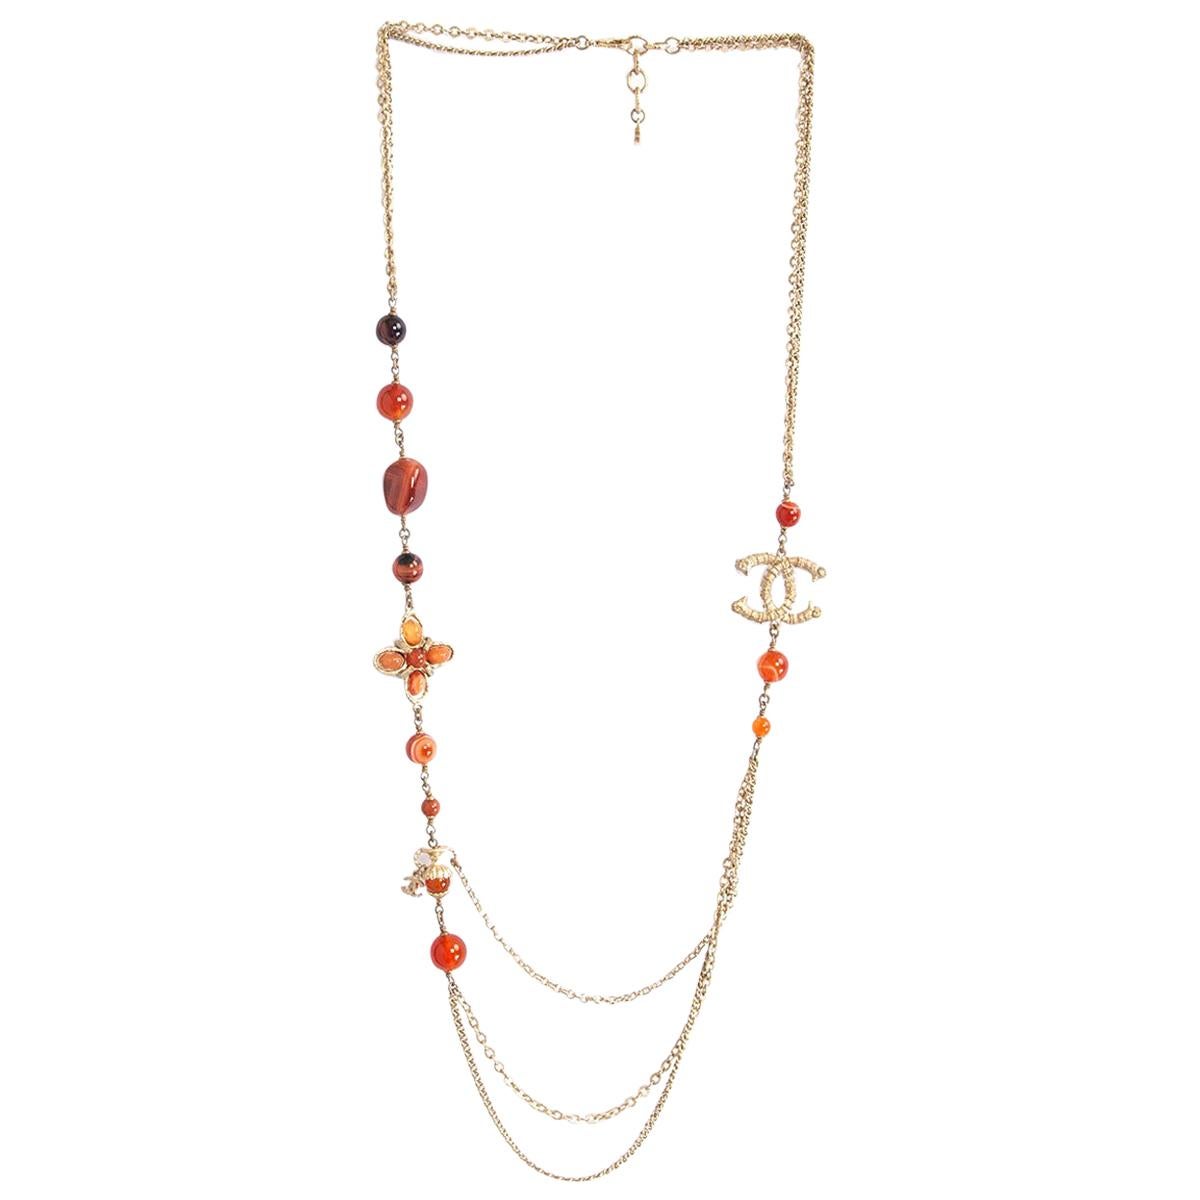 CHANEL orange & gold 2018 CRUISE PARIS GREECE BEADED Chain Necklace